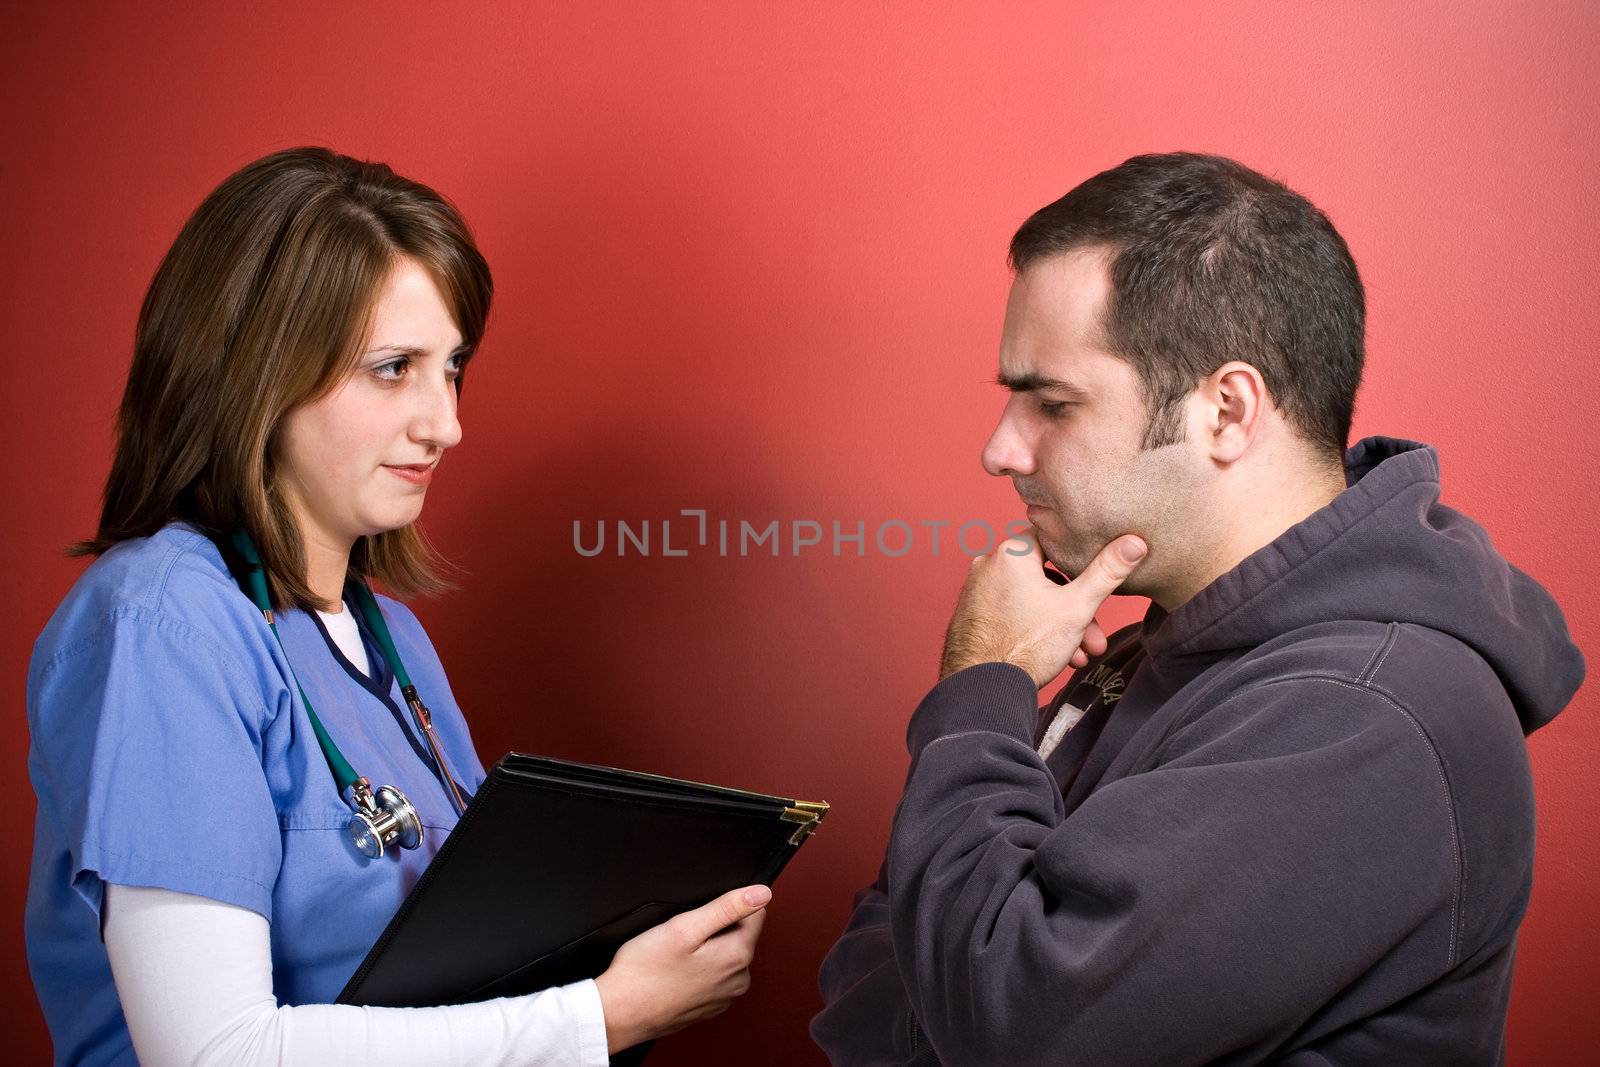 Man Talking To The Doctor by graficallyminded